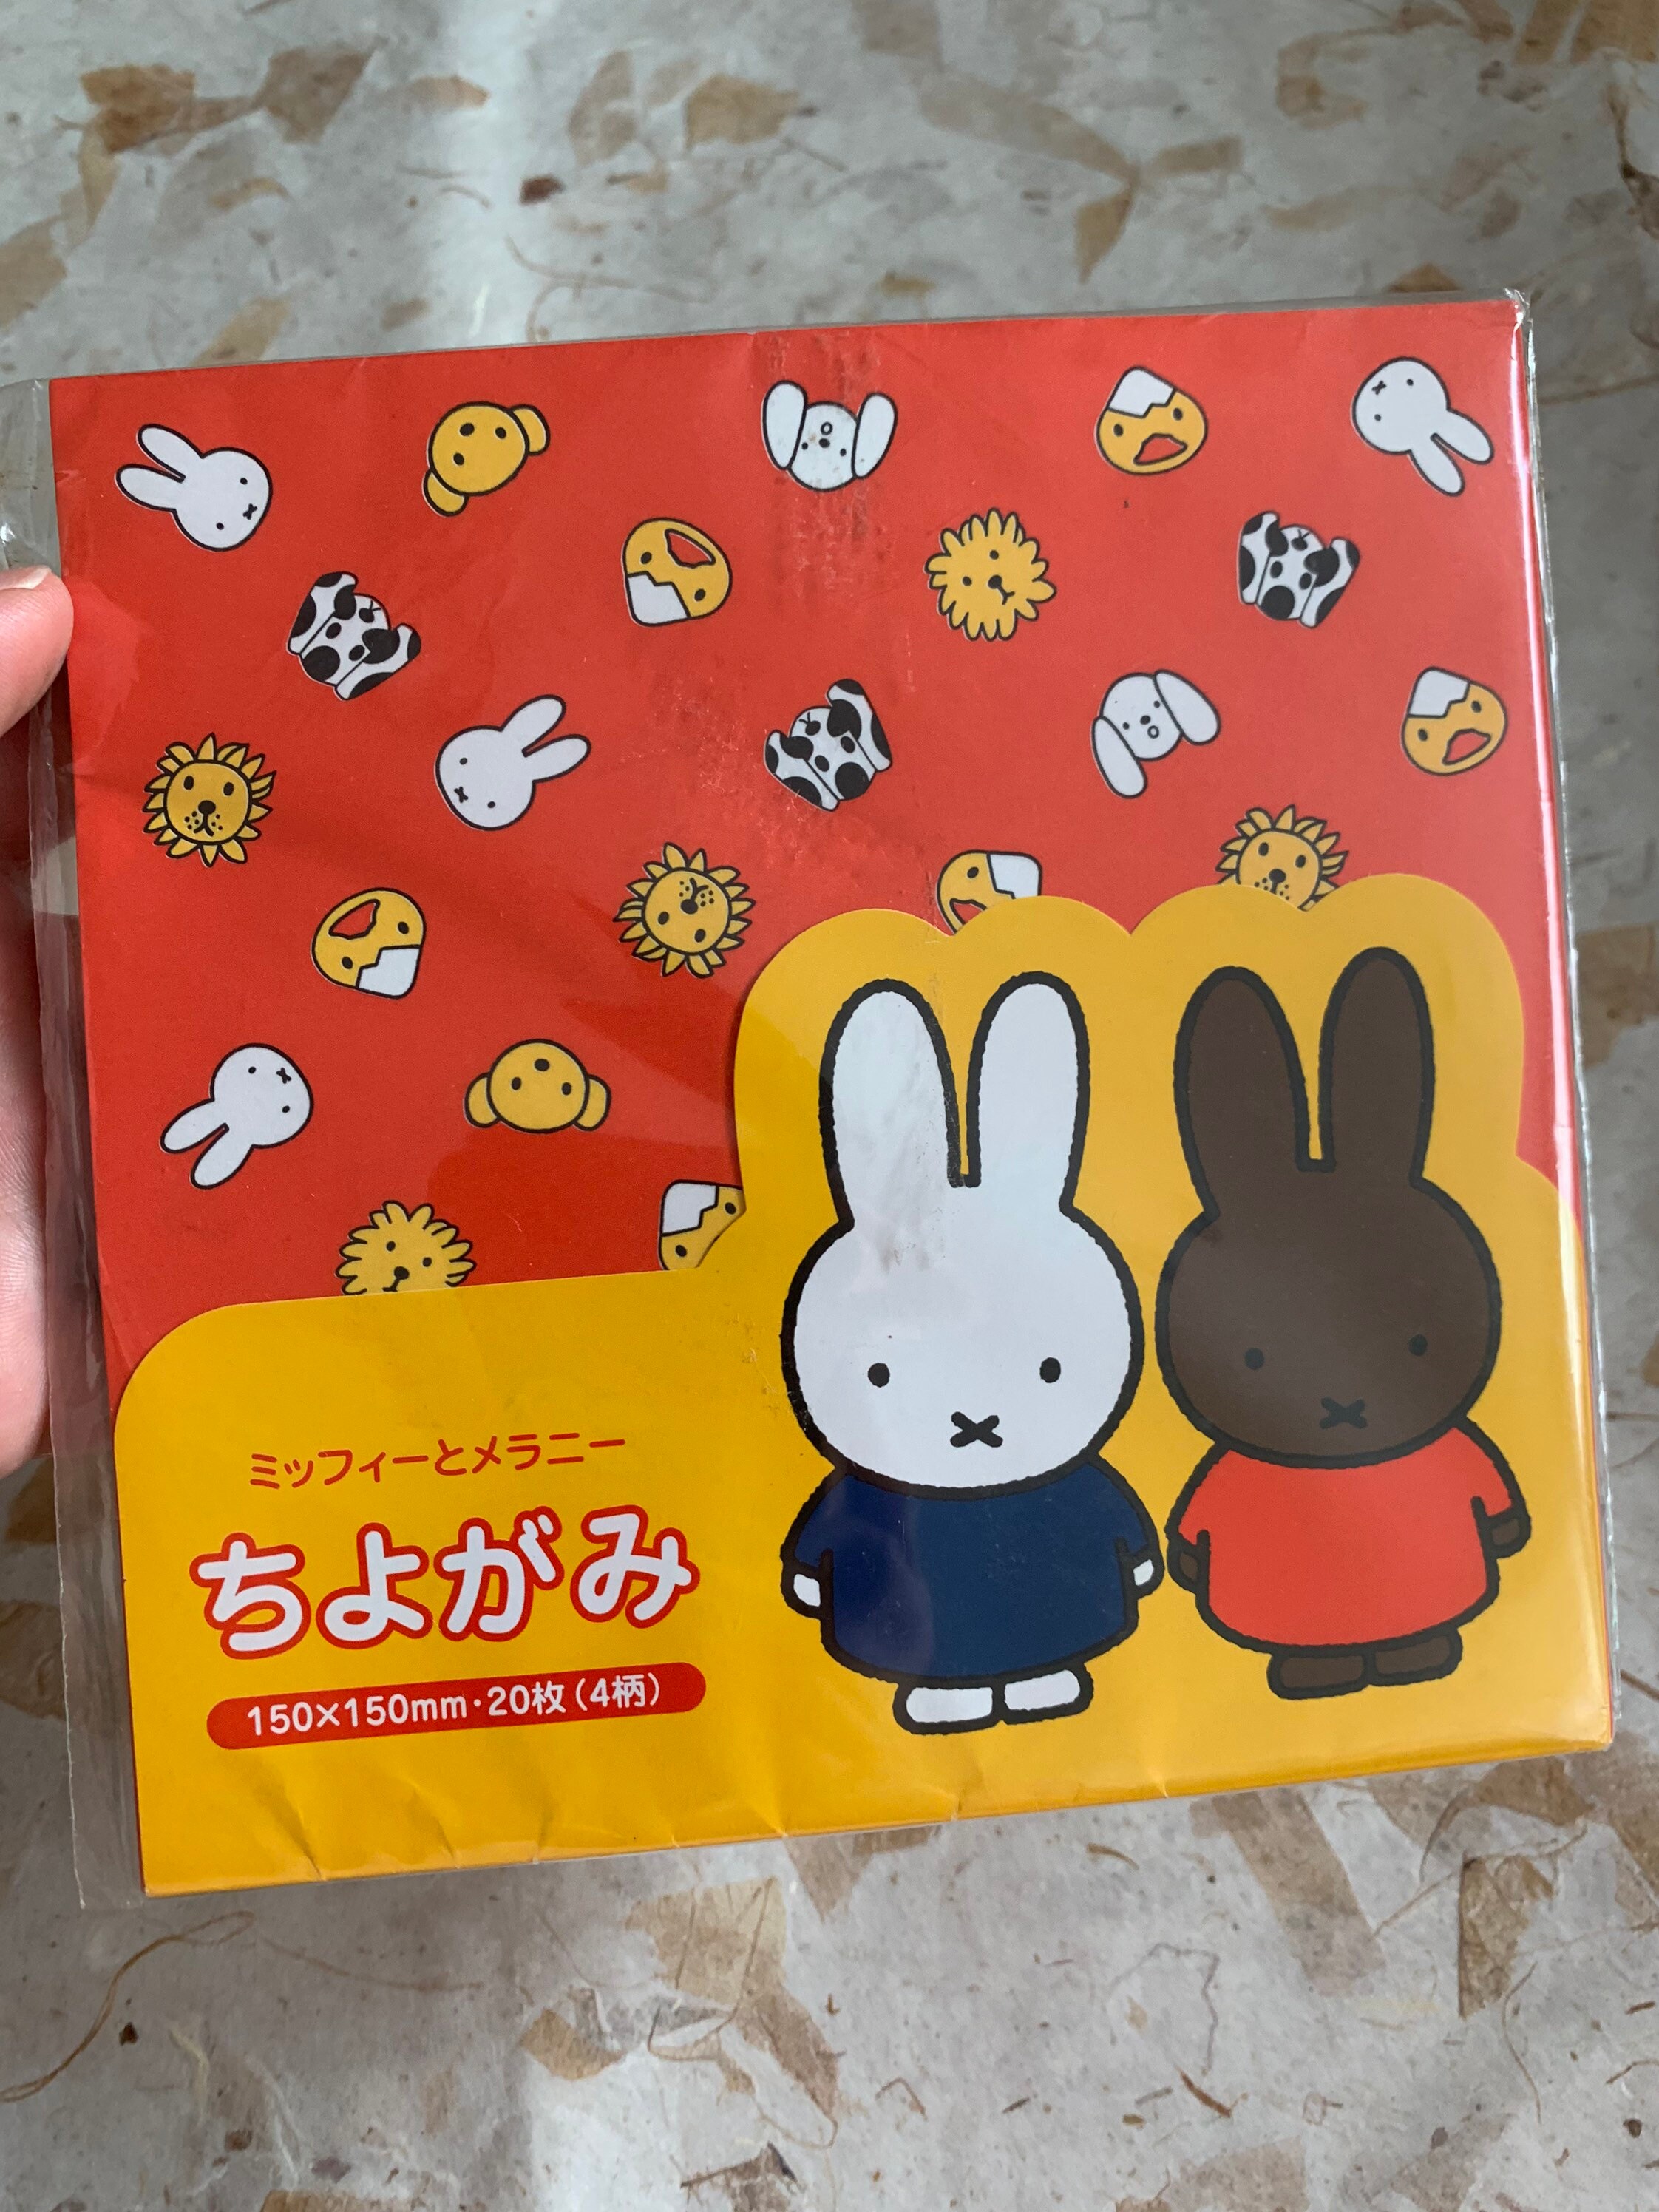 Miffy Book-Style Sticky Notes by Square (Miffy Meets Maruko Series)  [BW22-9] - Ethnic Pattern 4937122049098